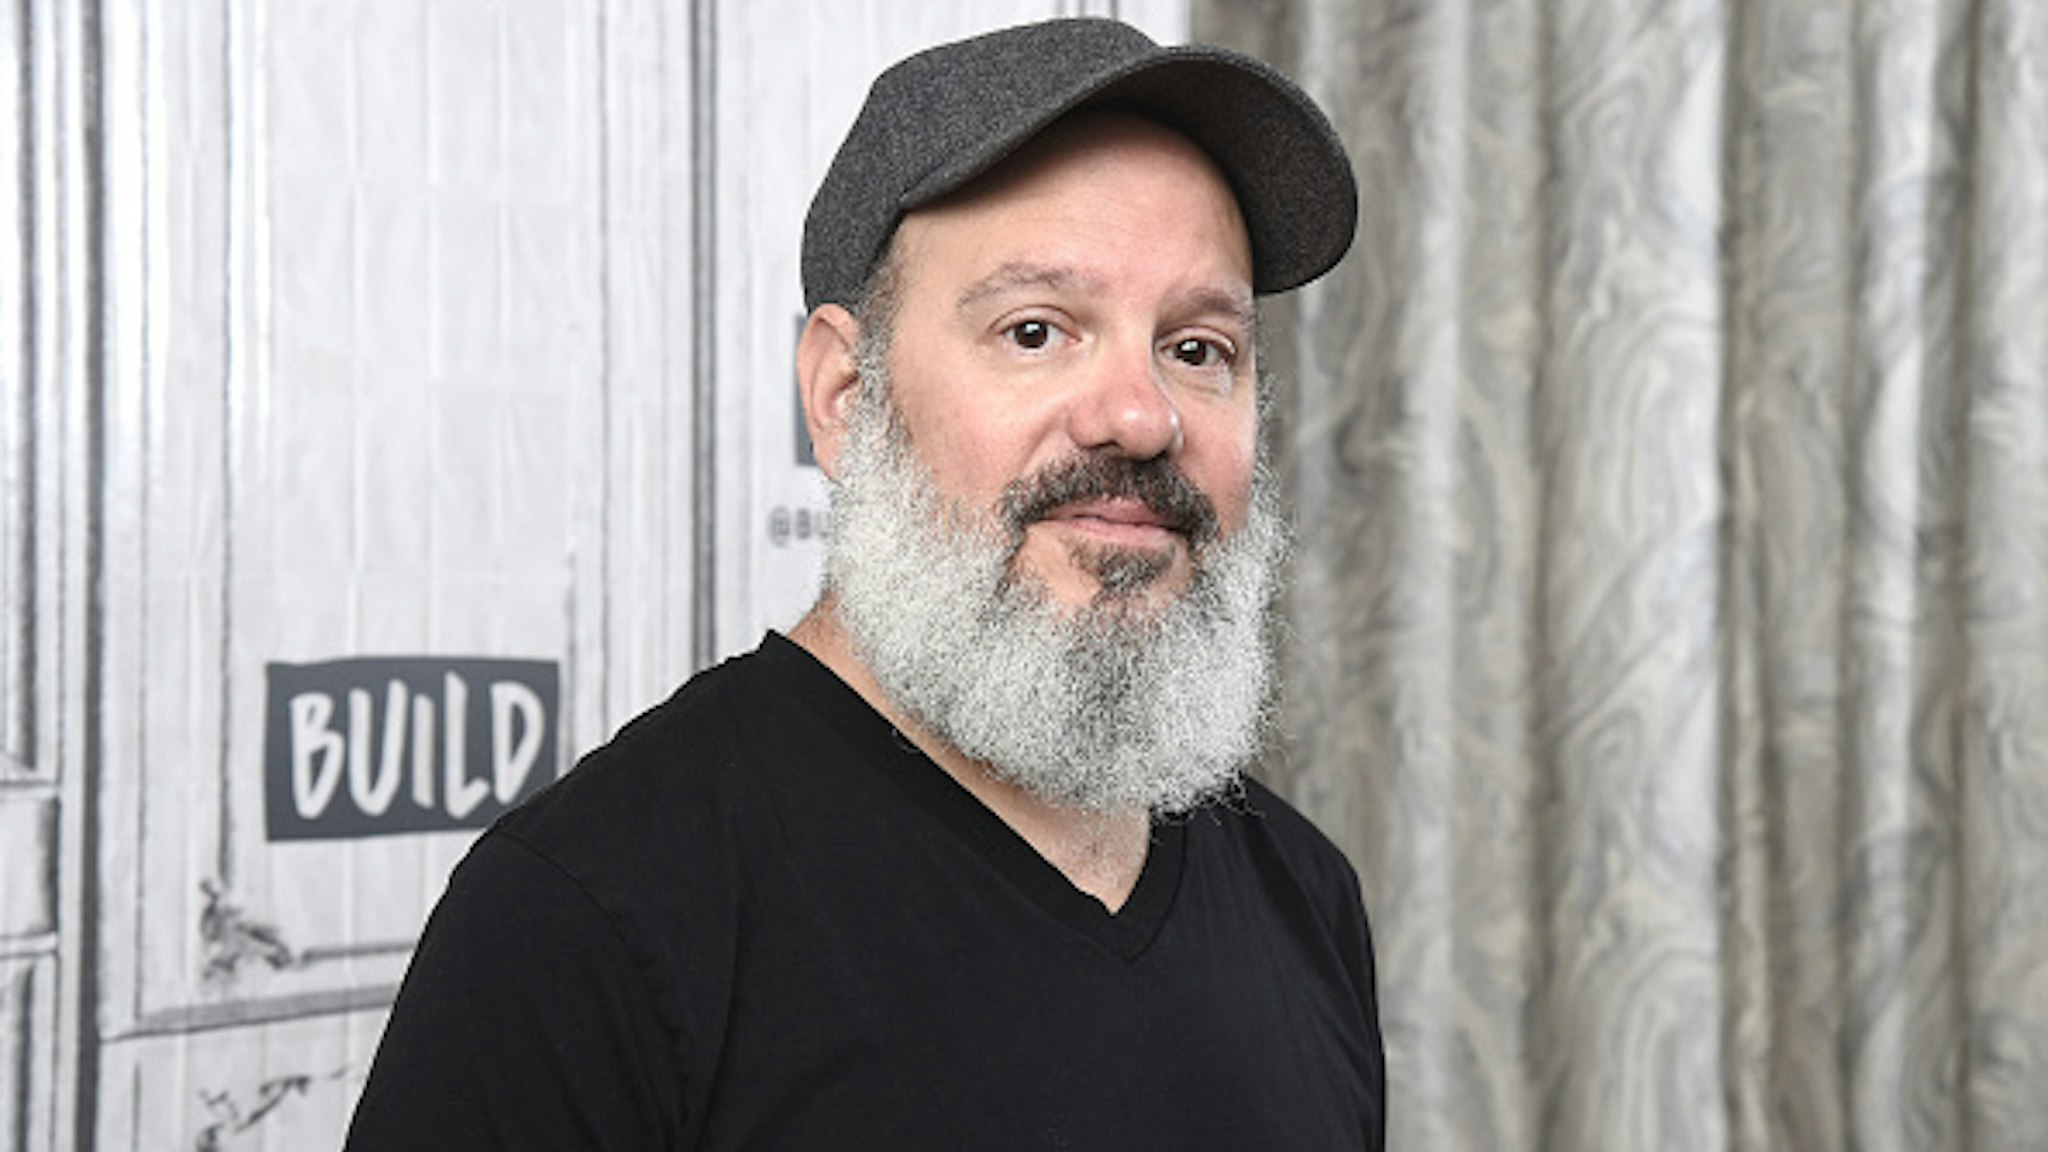 NEW YORK, NEW YORK - MAY 10: Comedian and actor David Cross visits the Build Series to discuss his new comedy tour 'Oh, Come On' at Build Studio on May 10, 2019 in New York City.